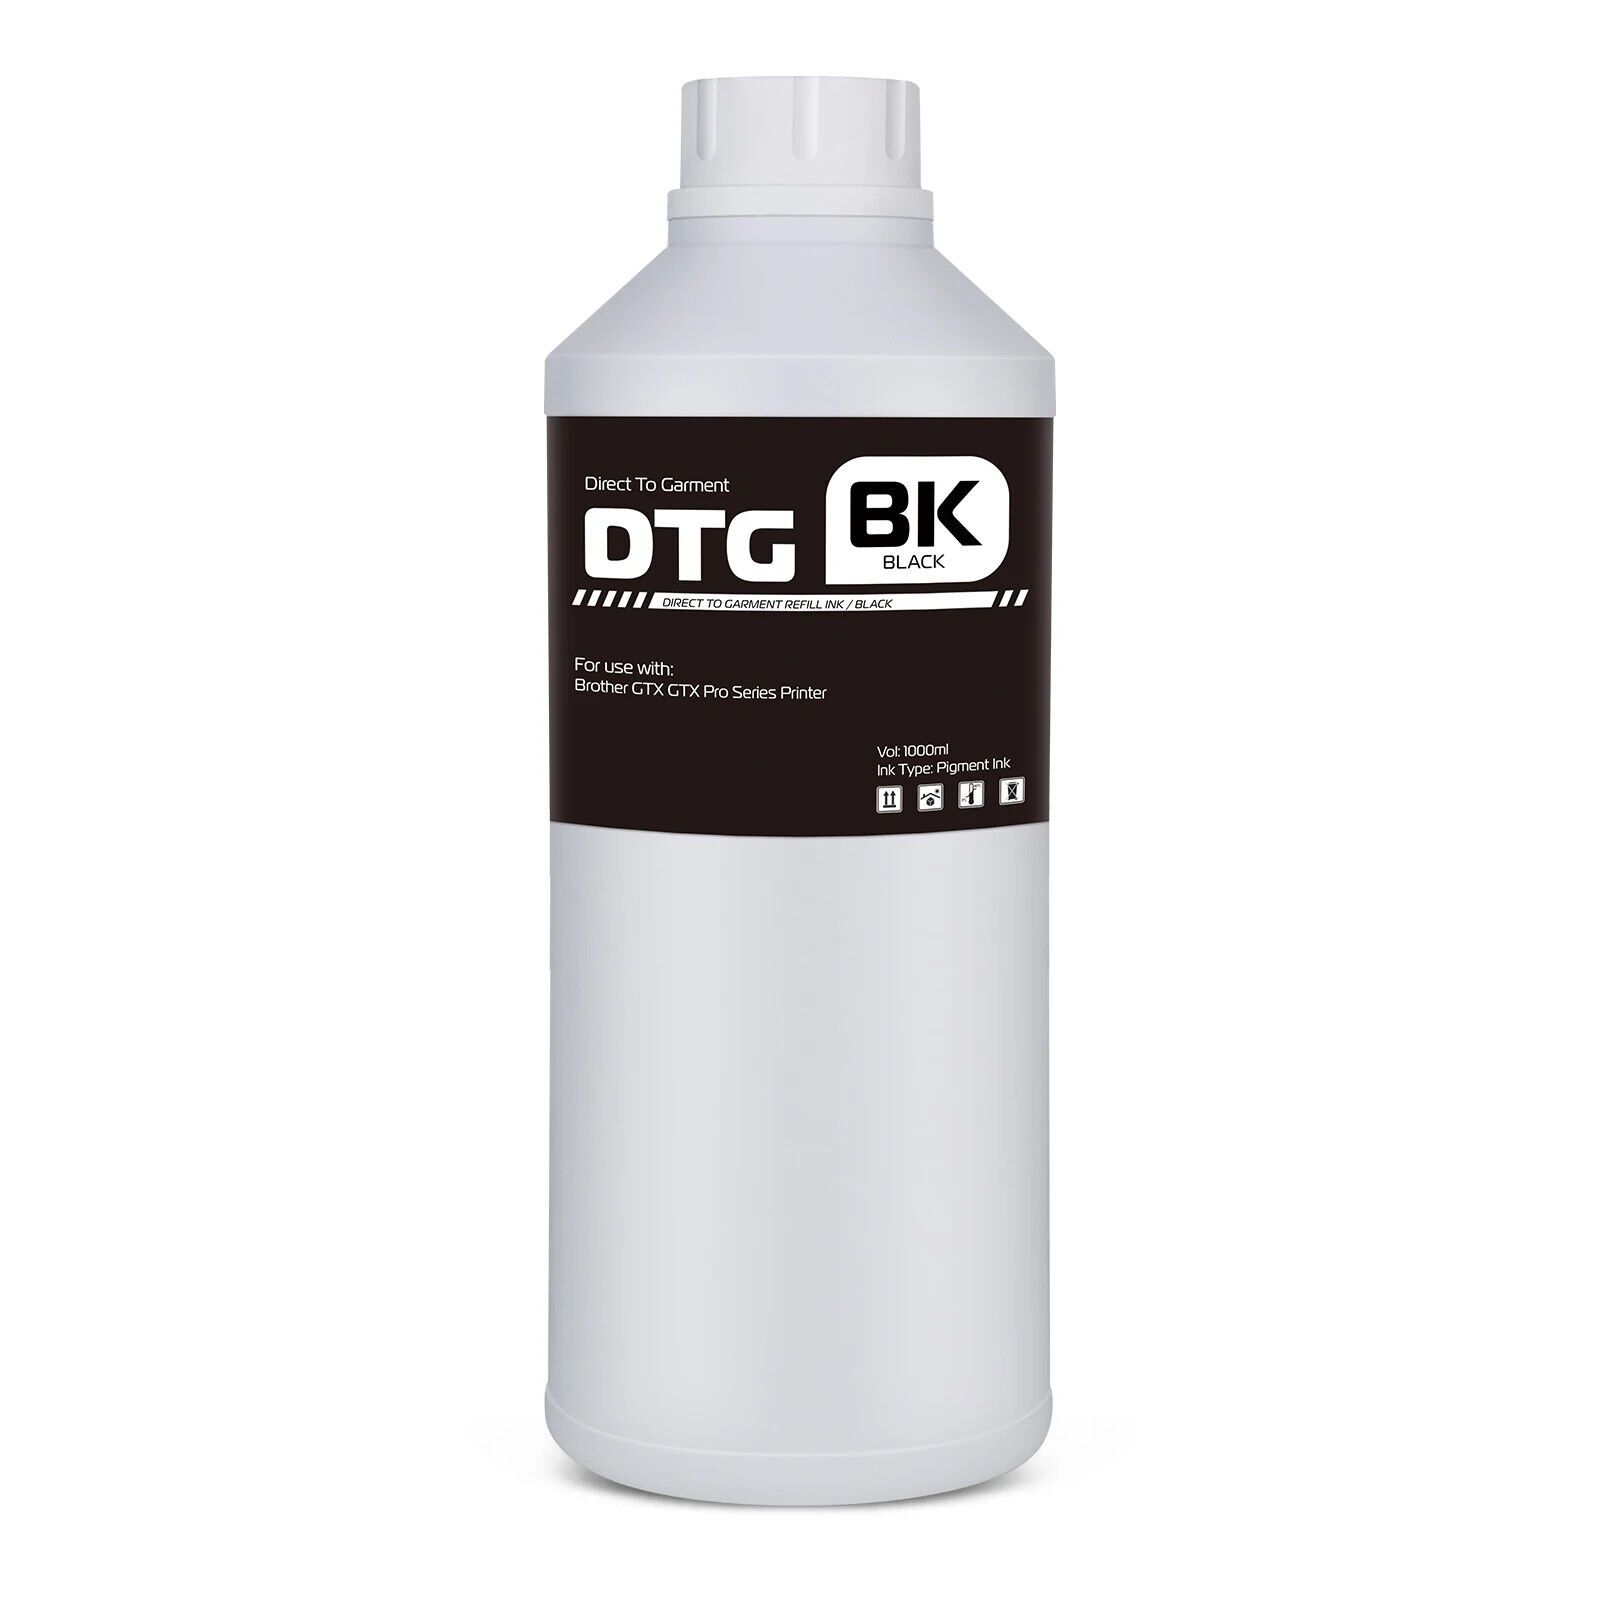 1000ml Textile Ink For Brother GTX GTX Pro 600 422 423 Series Printer DTG Ink